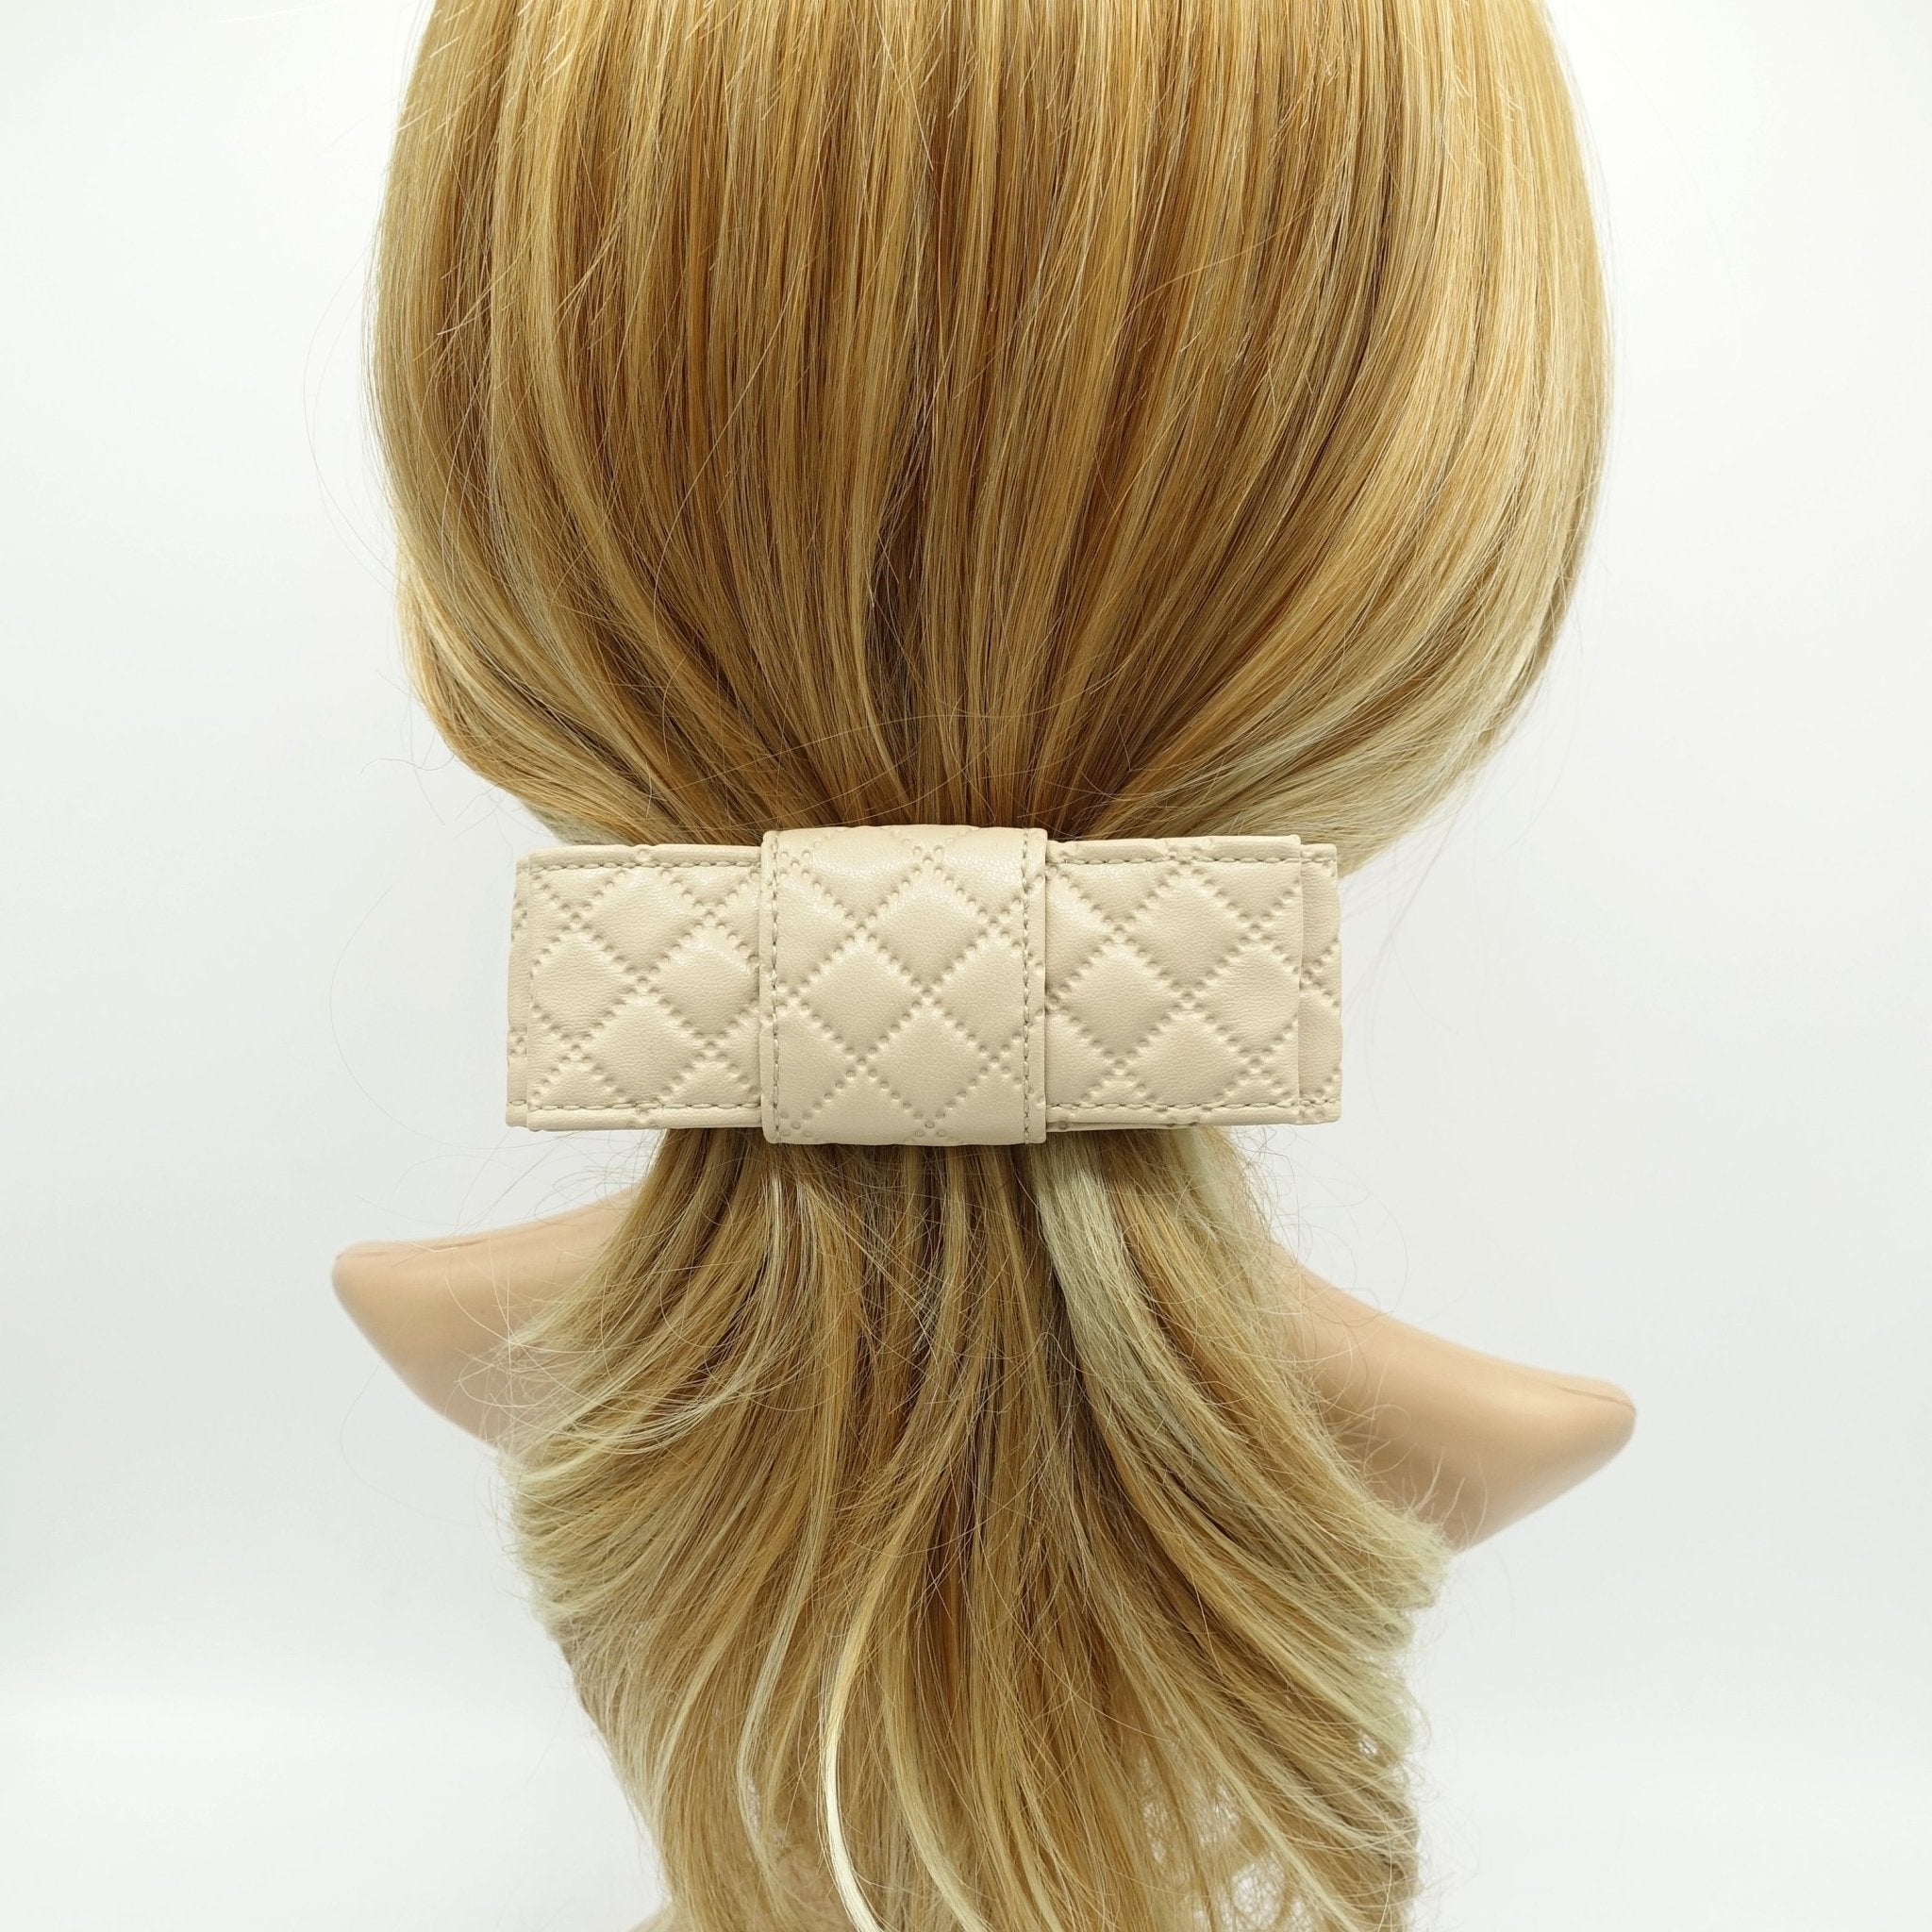 VeryShine quilted hair bow faux leather layered flat style bow for women